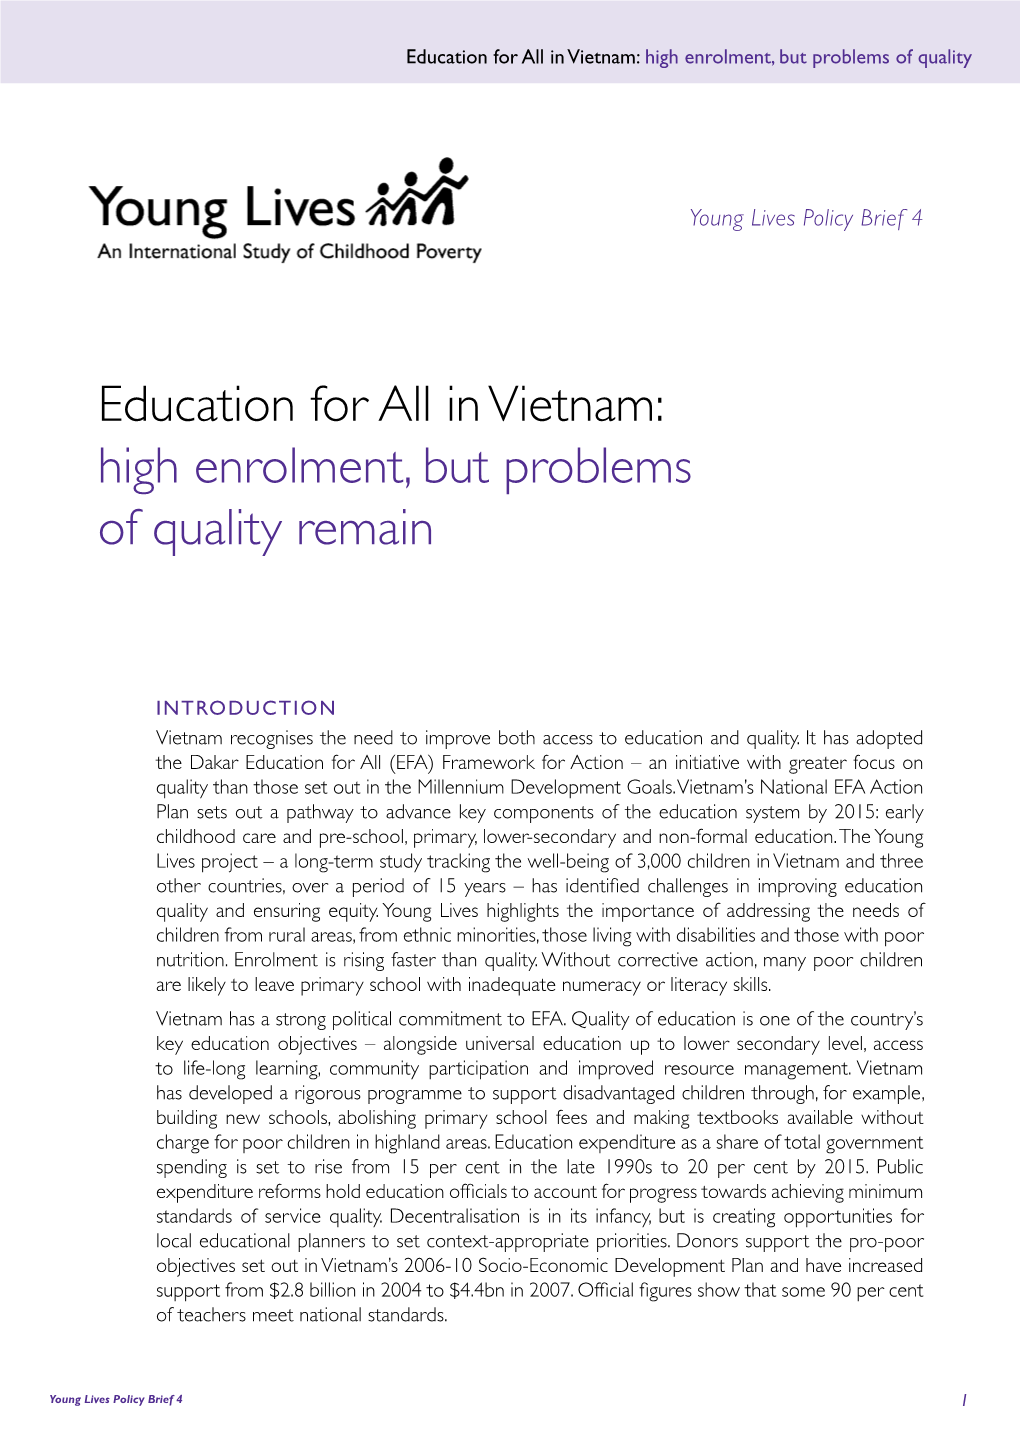 Education for All in Vietnam: High Enrolment, but Problems of Quality